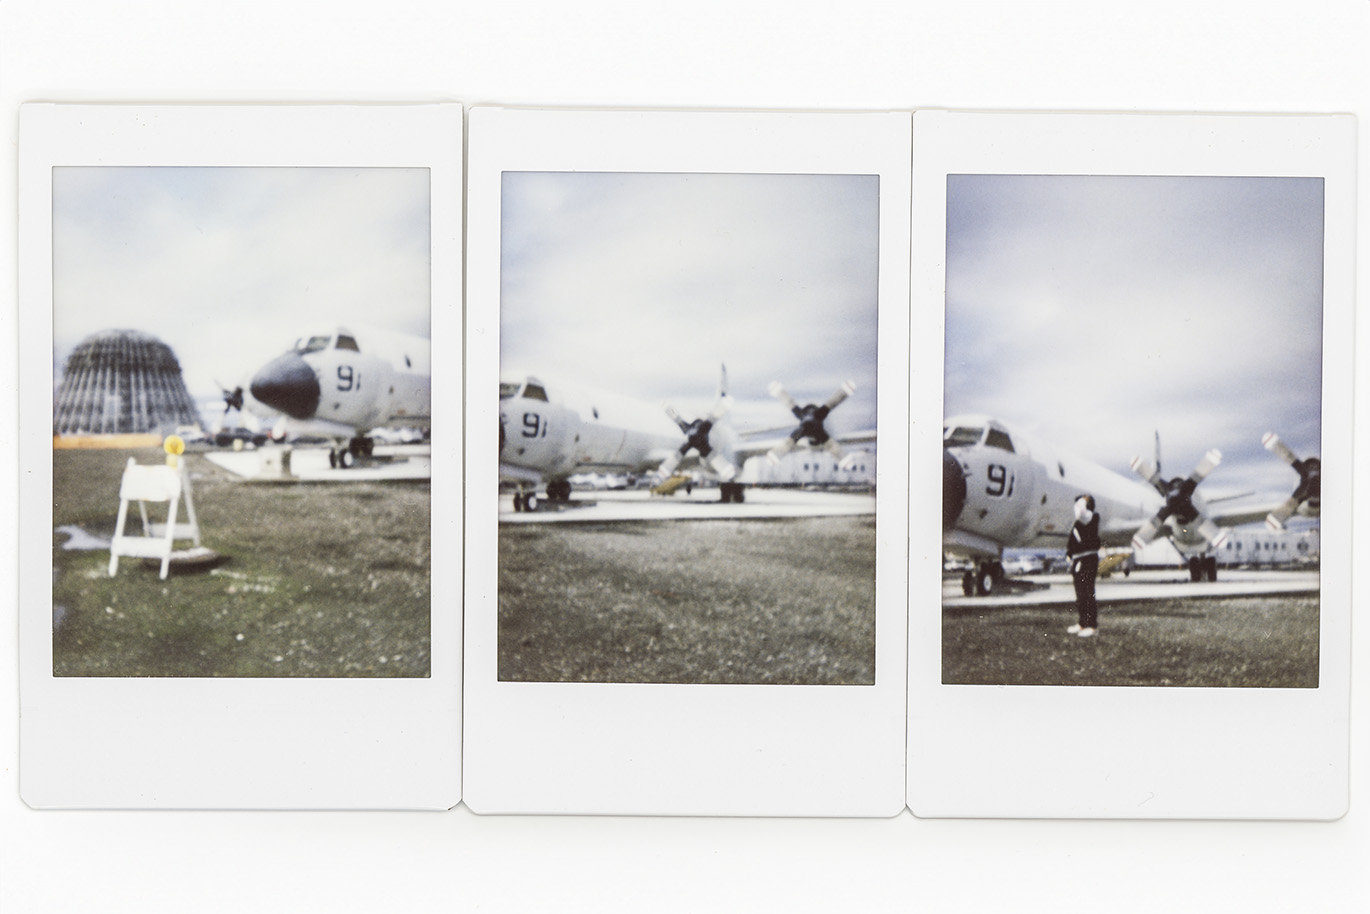 Set of three scanned polaroid photos showing an airplane.